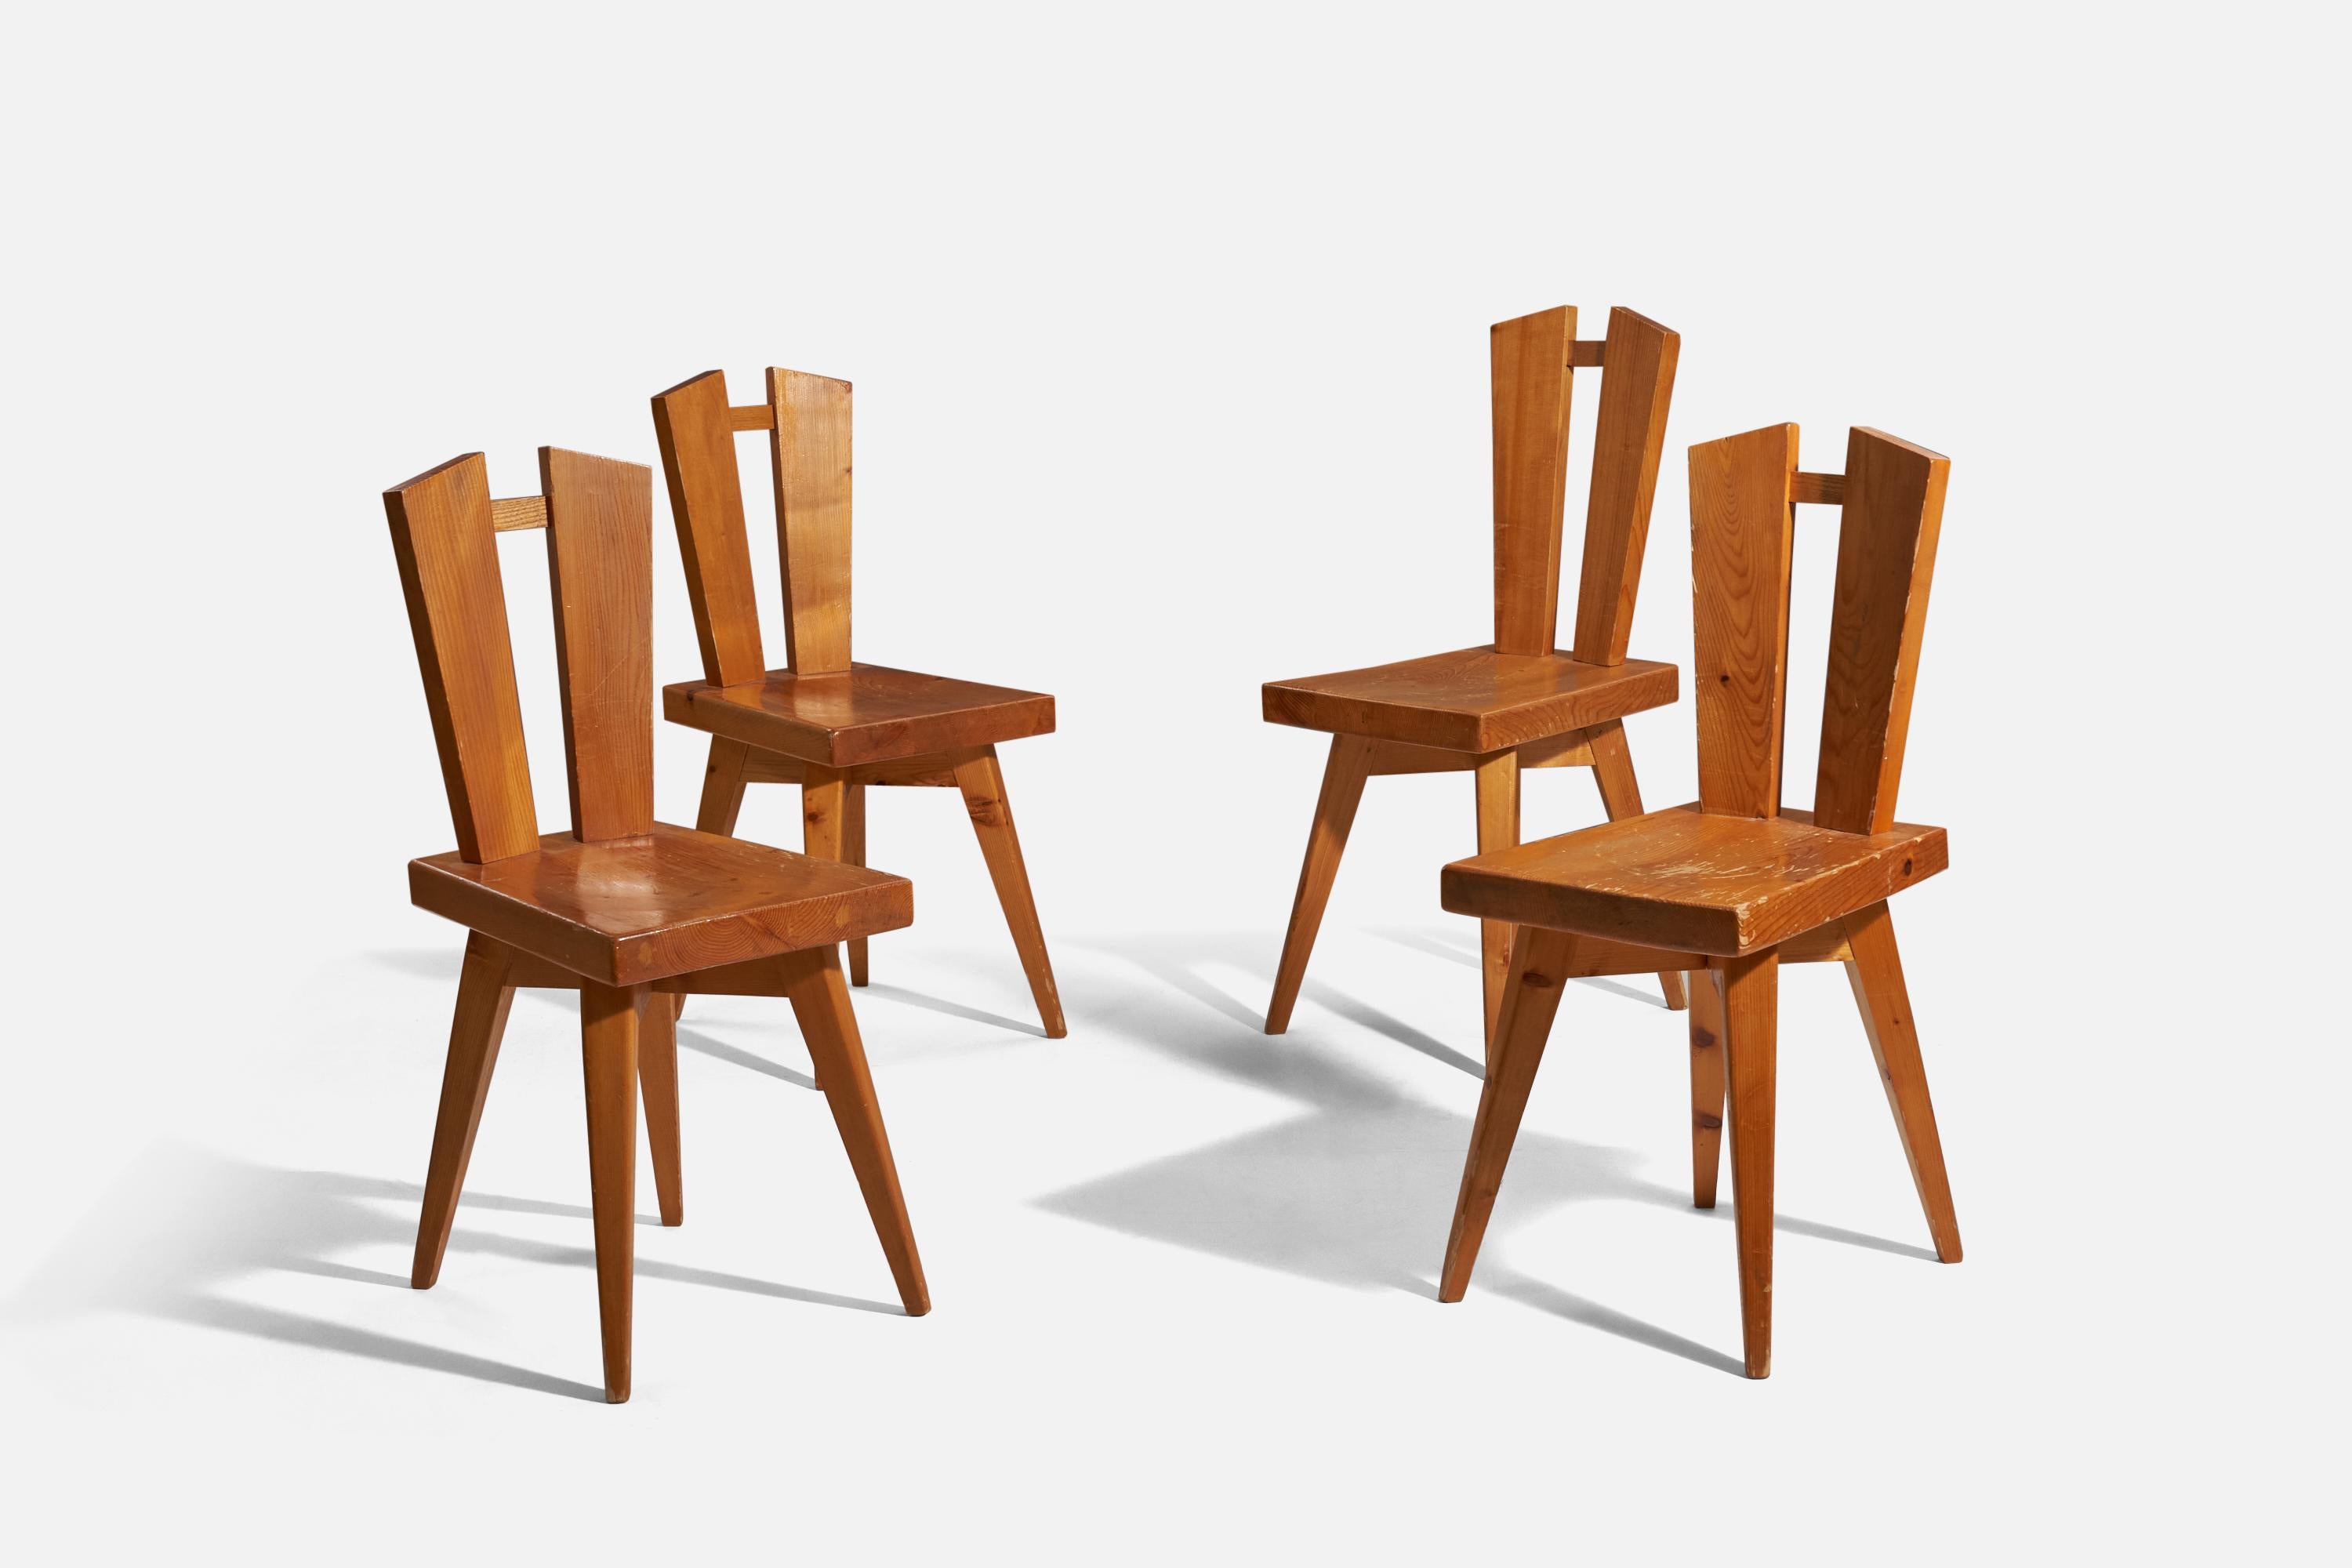 A set of pine dining chairs designed by Christian Durupt, for Charlotte Perriand, France, 1960s.

Please note that one chair is slightly taller than the other three.